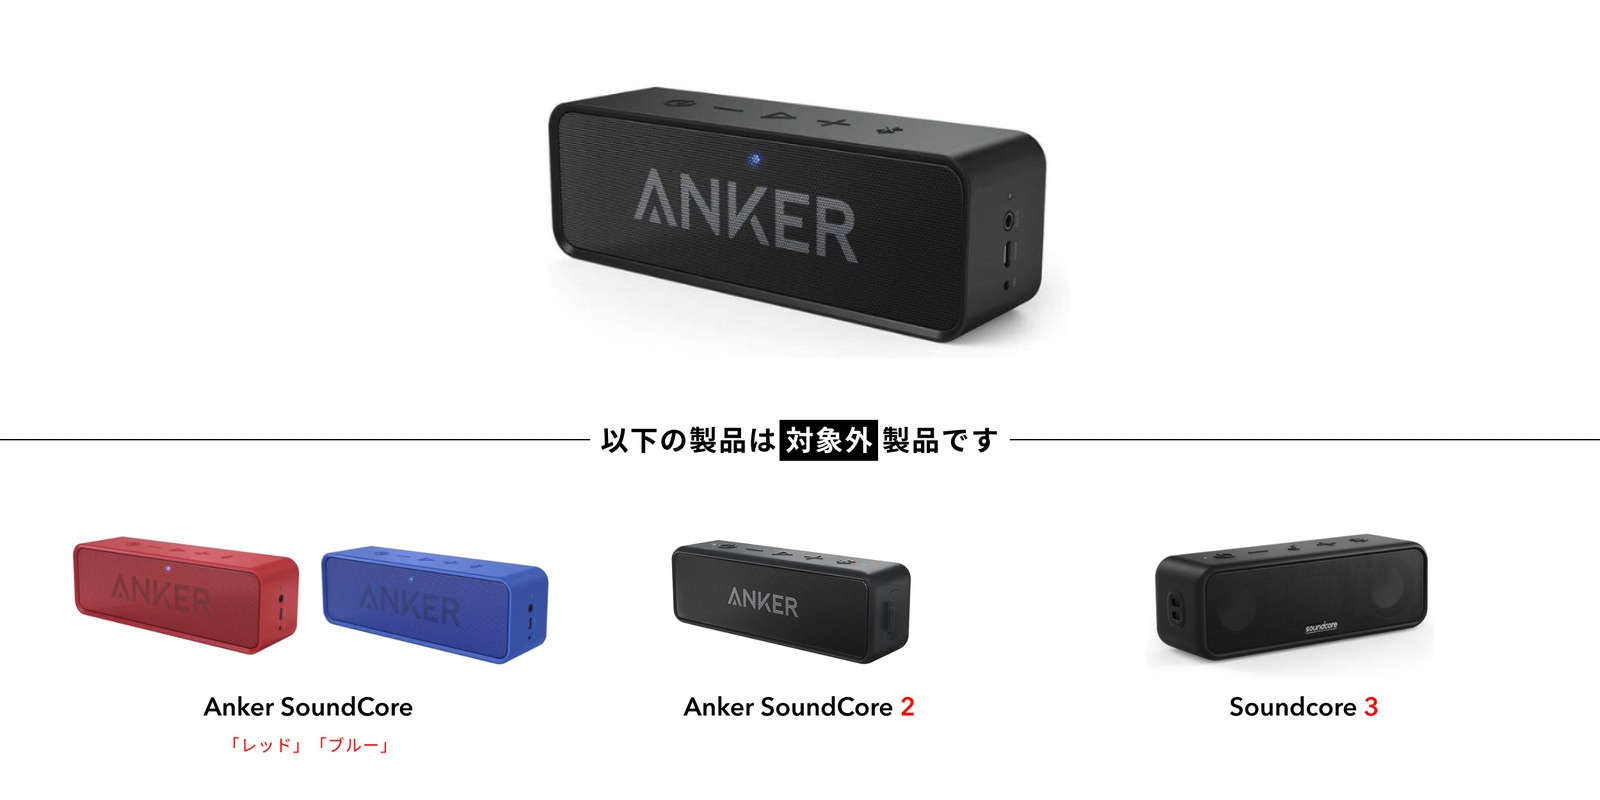 Anker Soundcore products 01